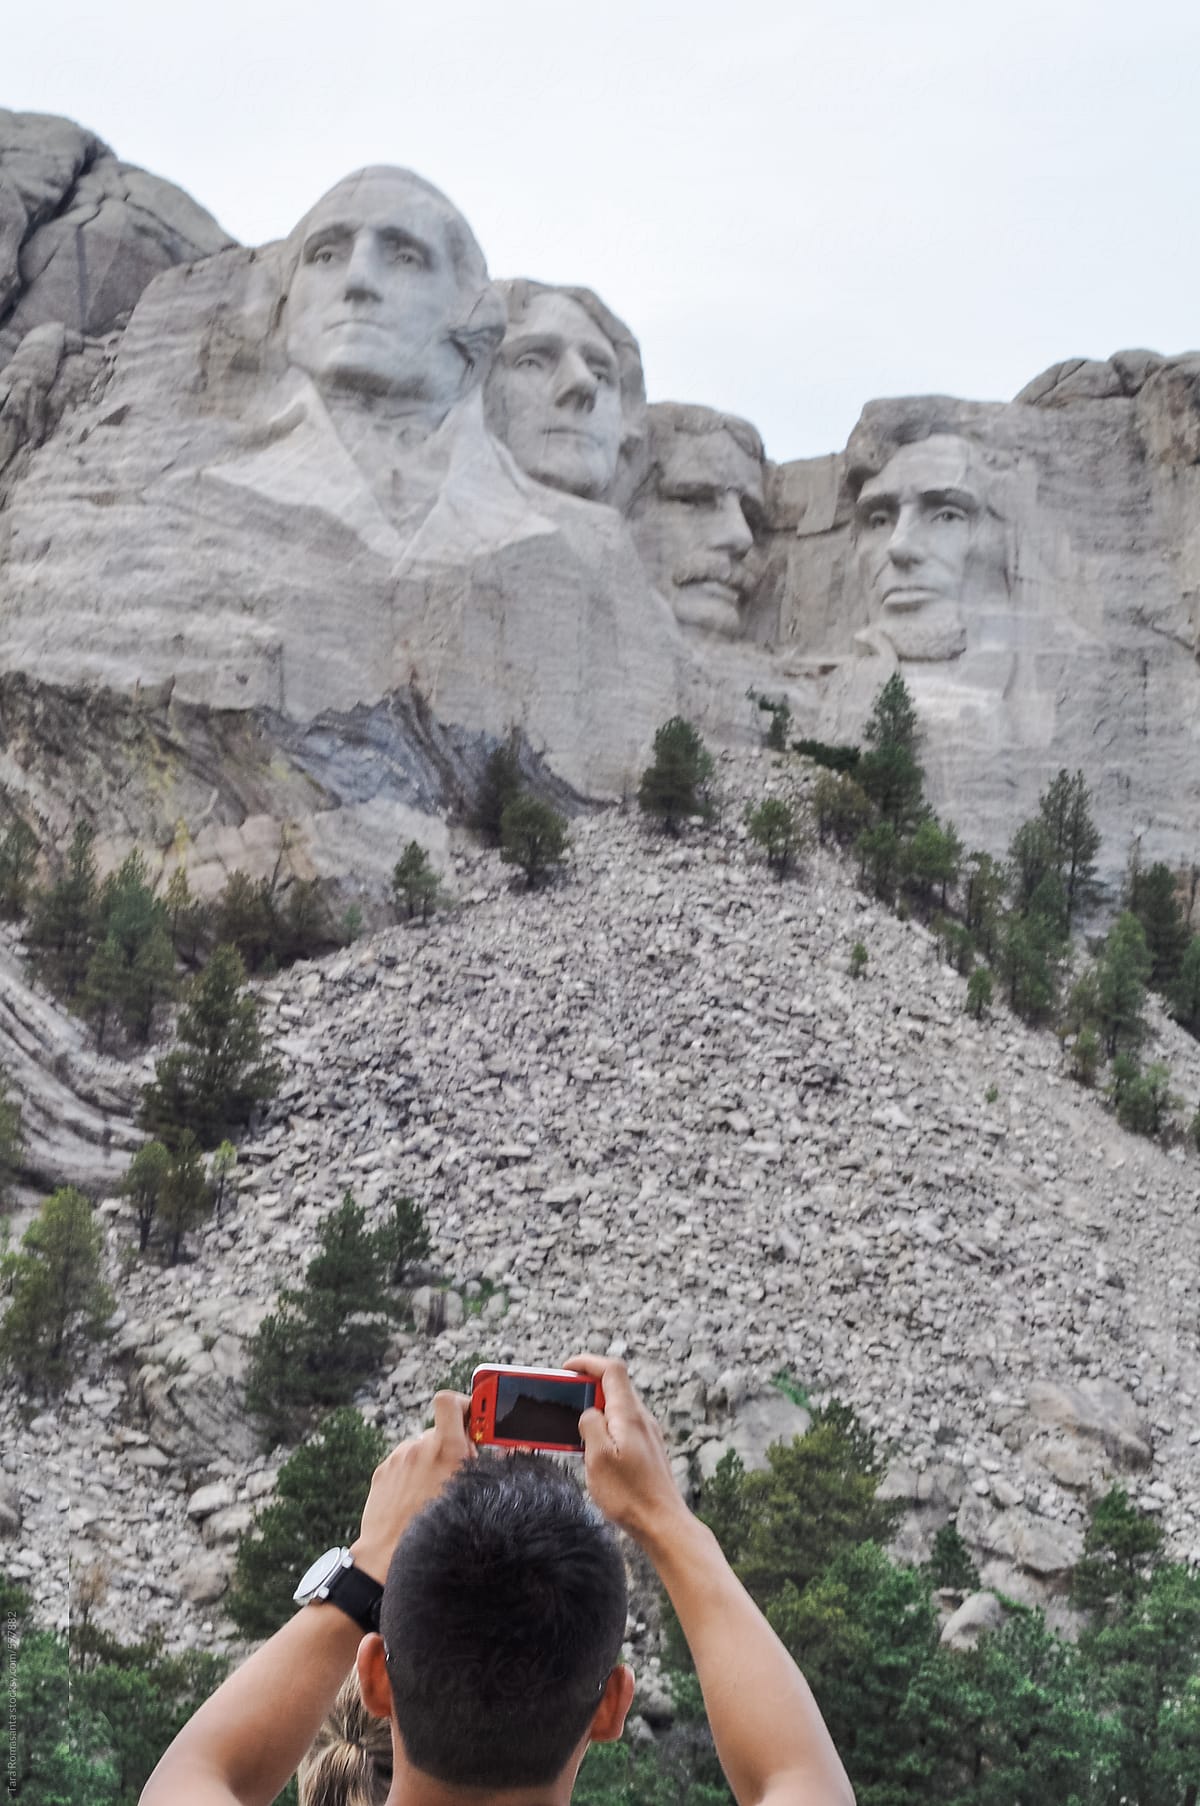 tourist takes photo of Mount Rushmore with his mobile phone